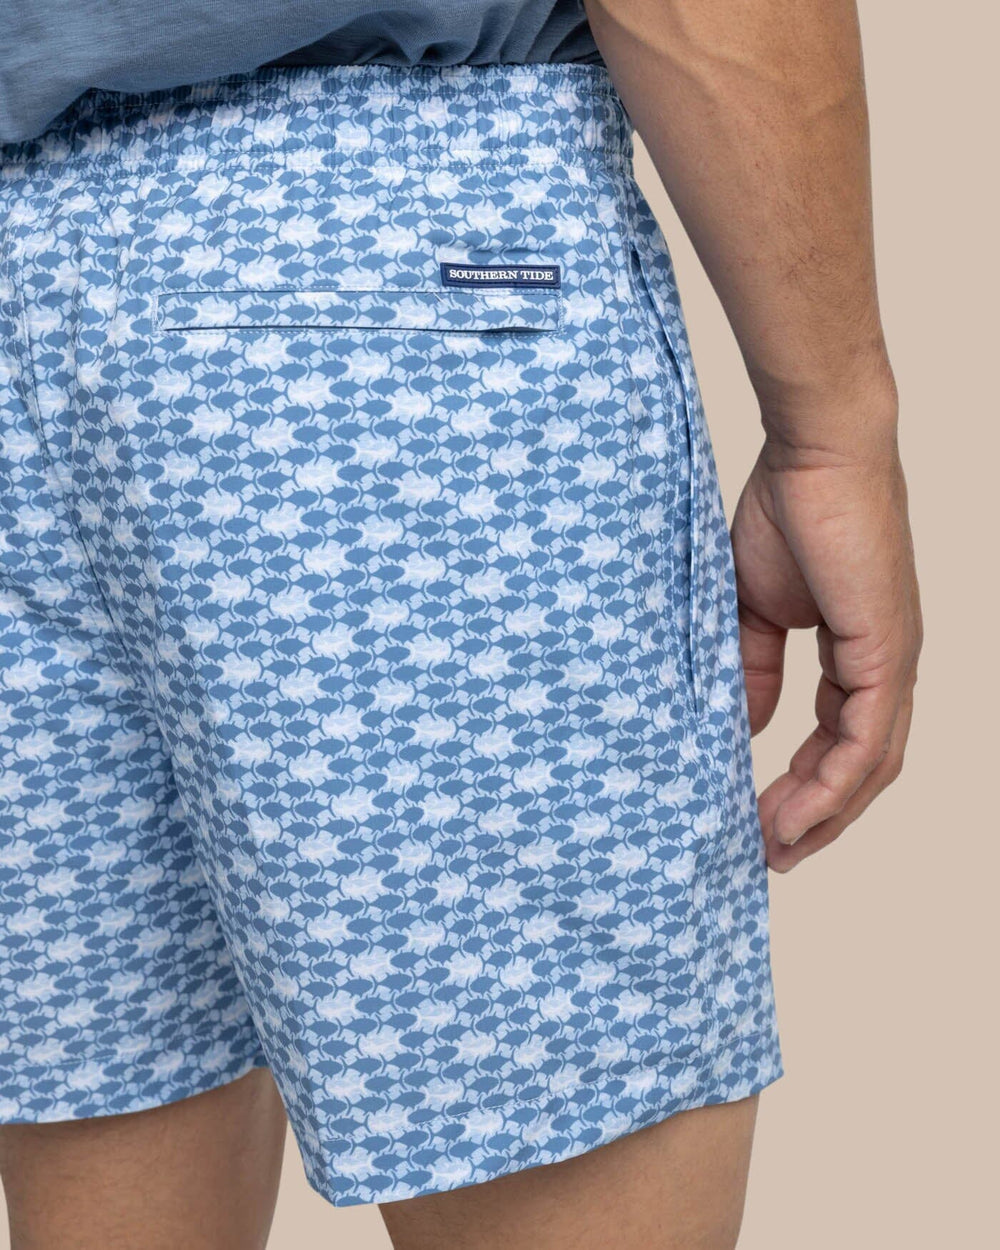 The detail view of the Southern Tide Heather Skipping Jacks Swim Trunk by Southern Tide - Heather Clearwater Blue